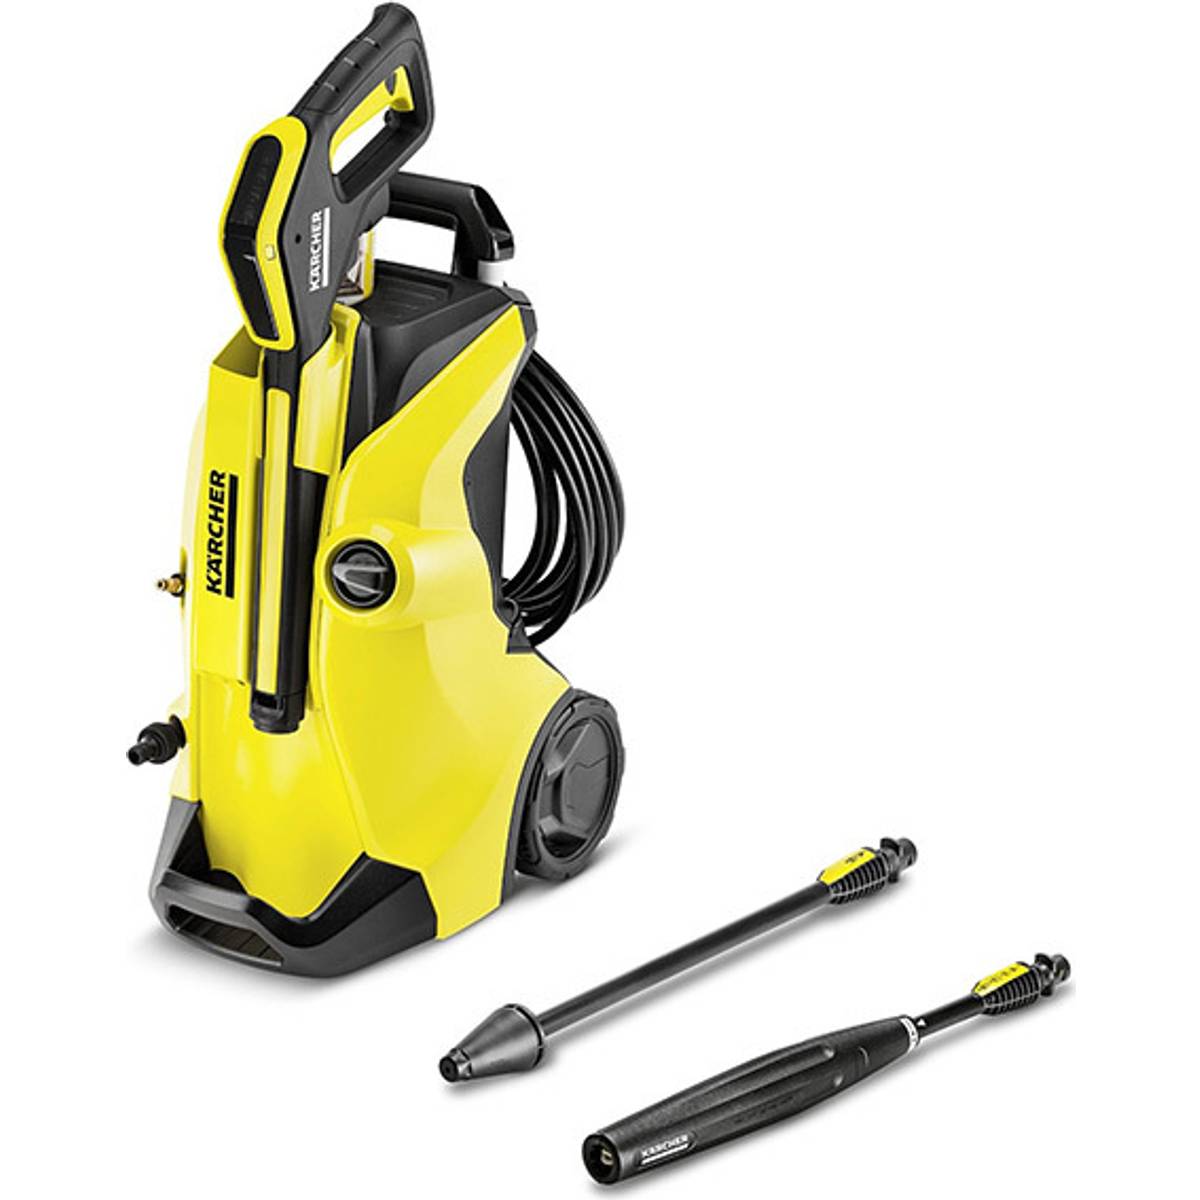 Pressure Washer 700 Models On Pricerunner See Lowest Prices